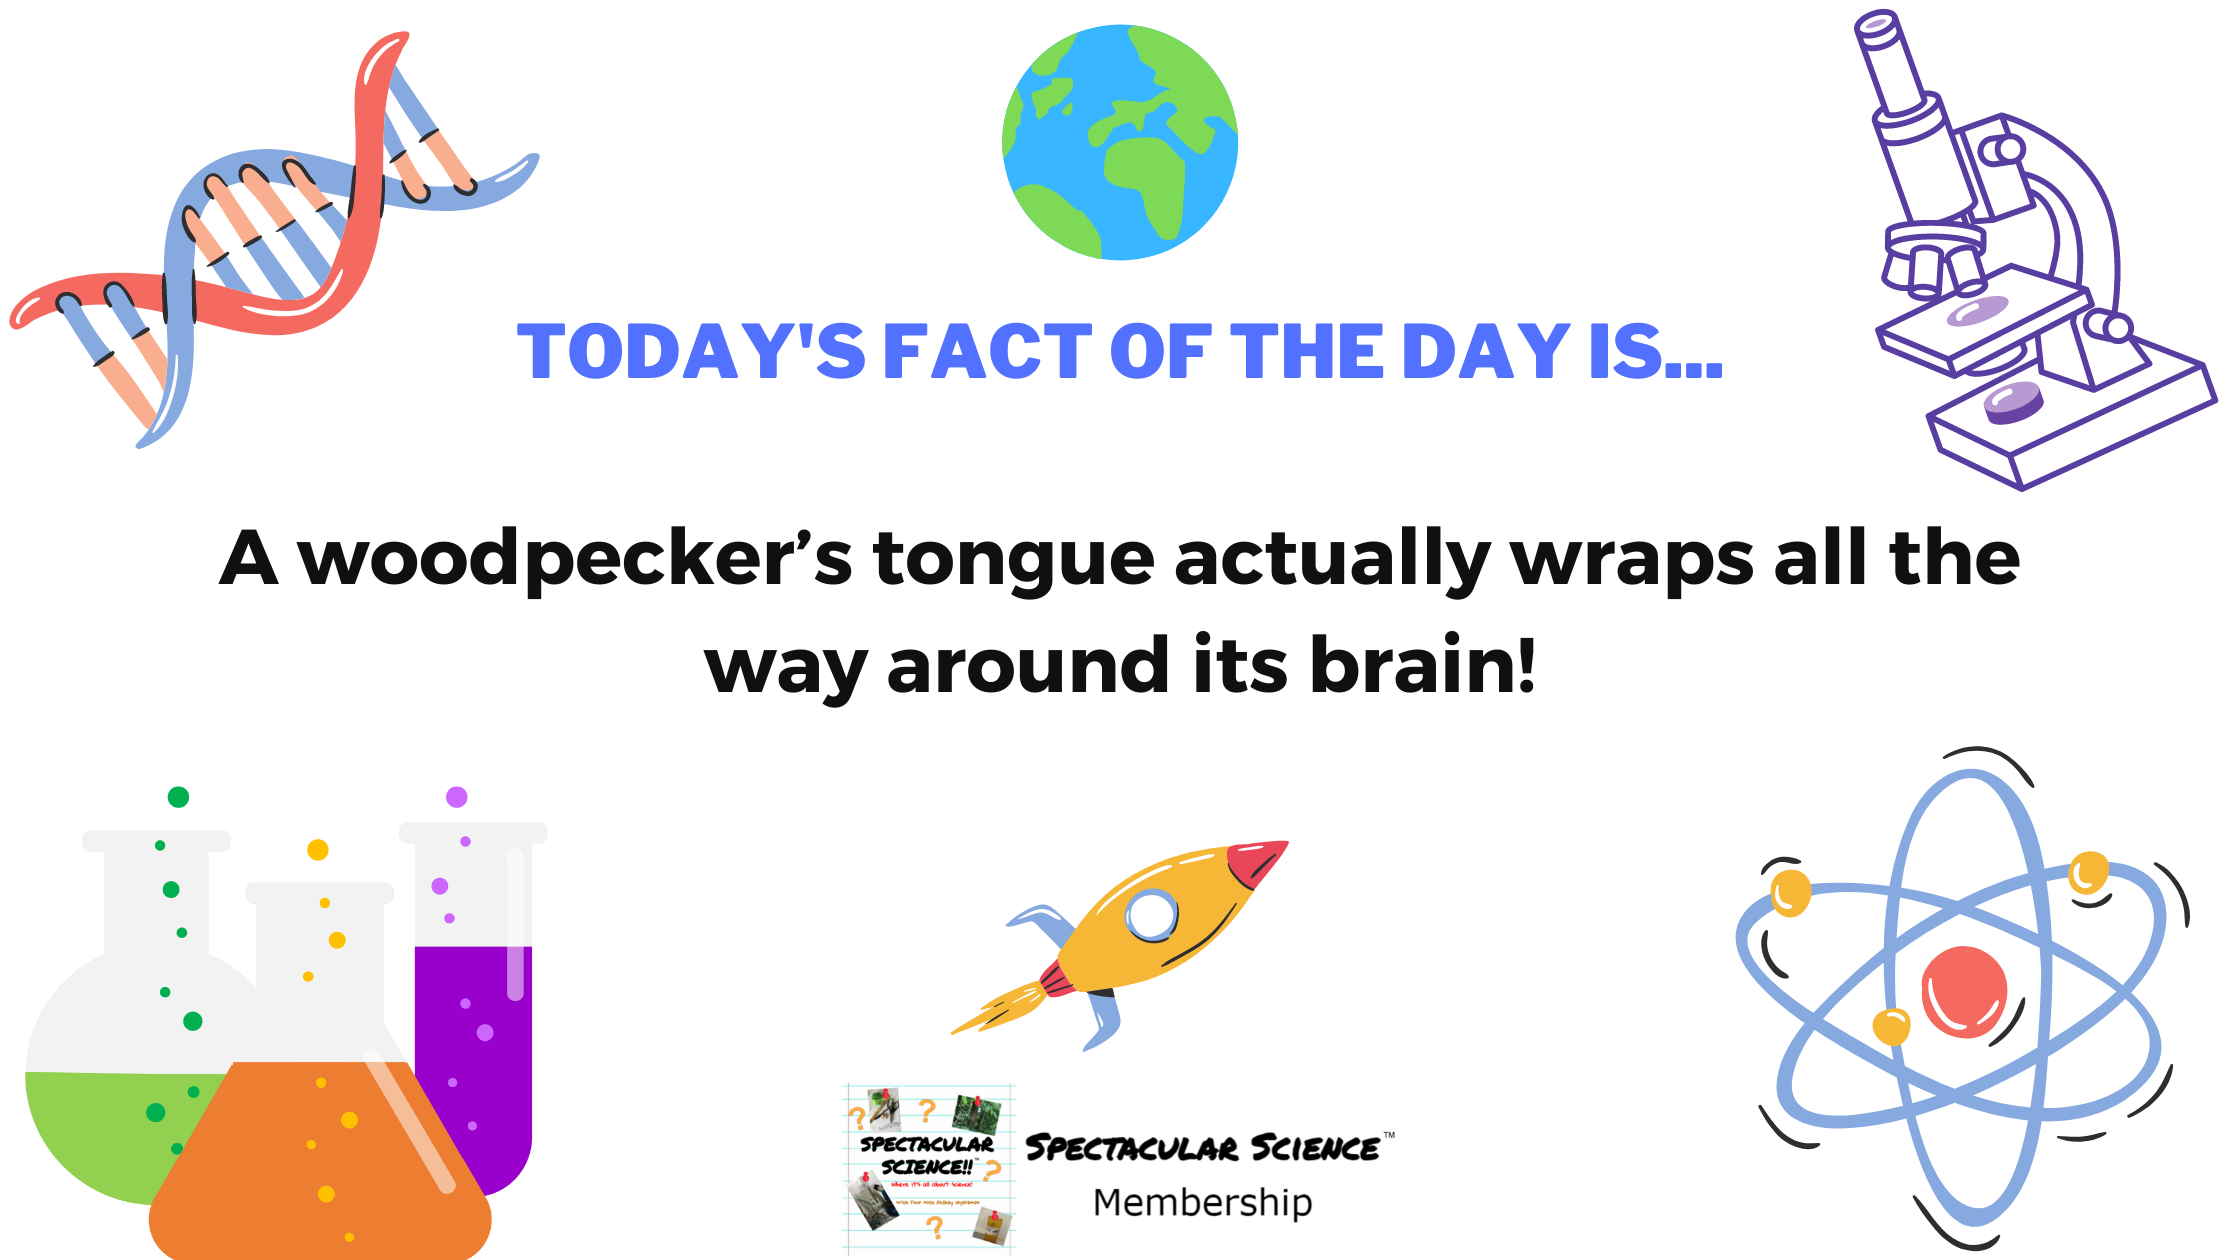 Fact of the Day Image August 11th